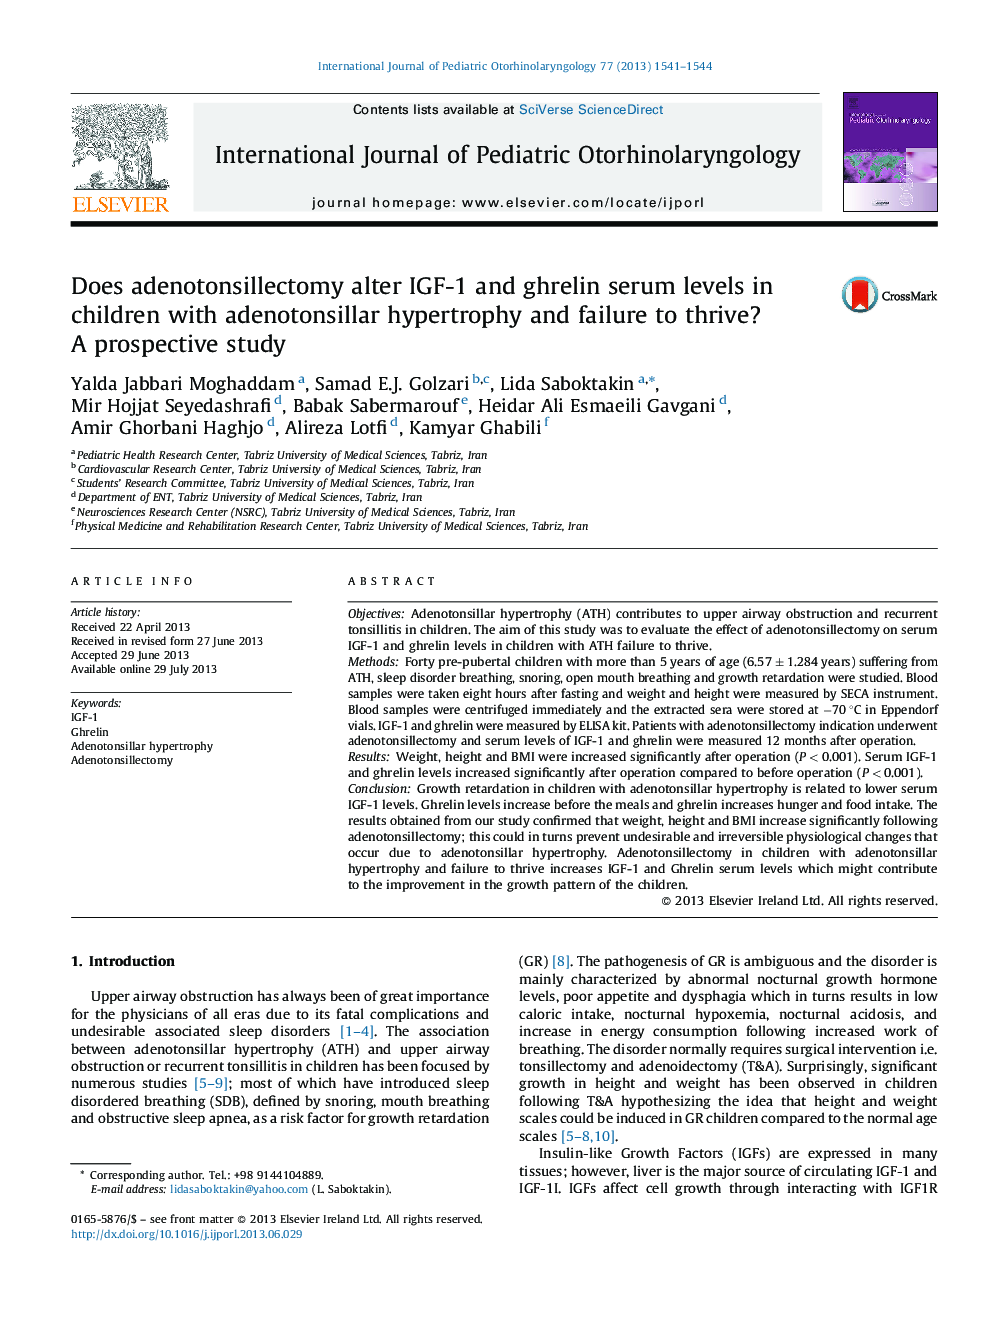 Does adenotonsillectomy alter IGF-1 and ghrelin serum levels in children with adenotonsillar hypertrophy and failure to thrive? A prospective study